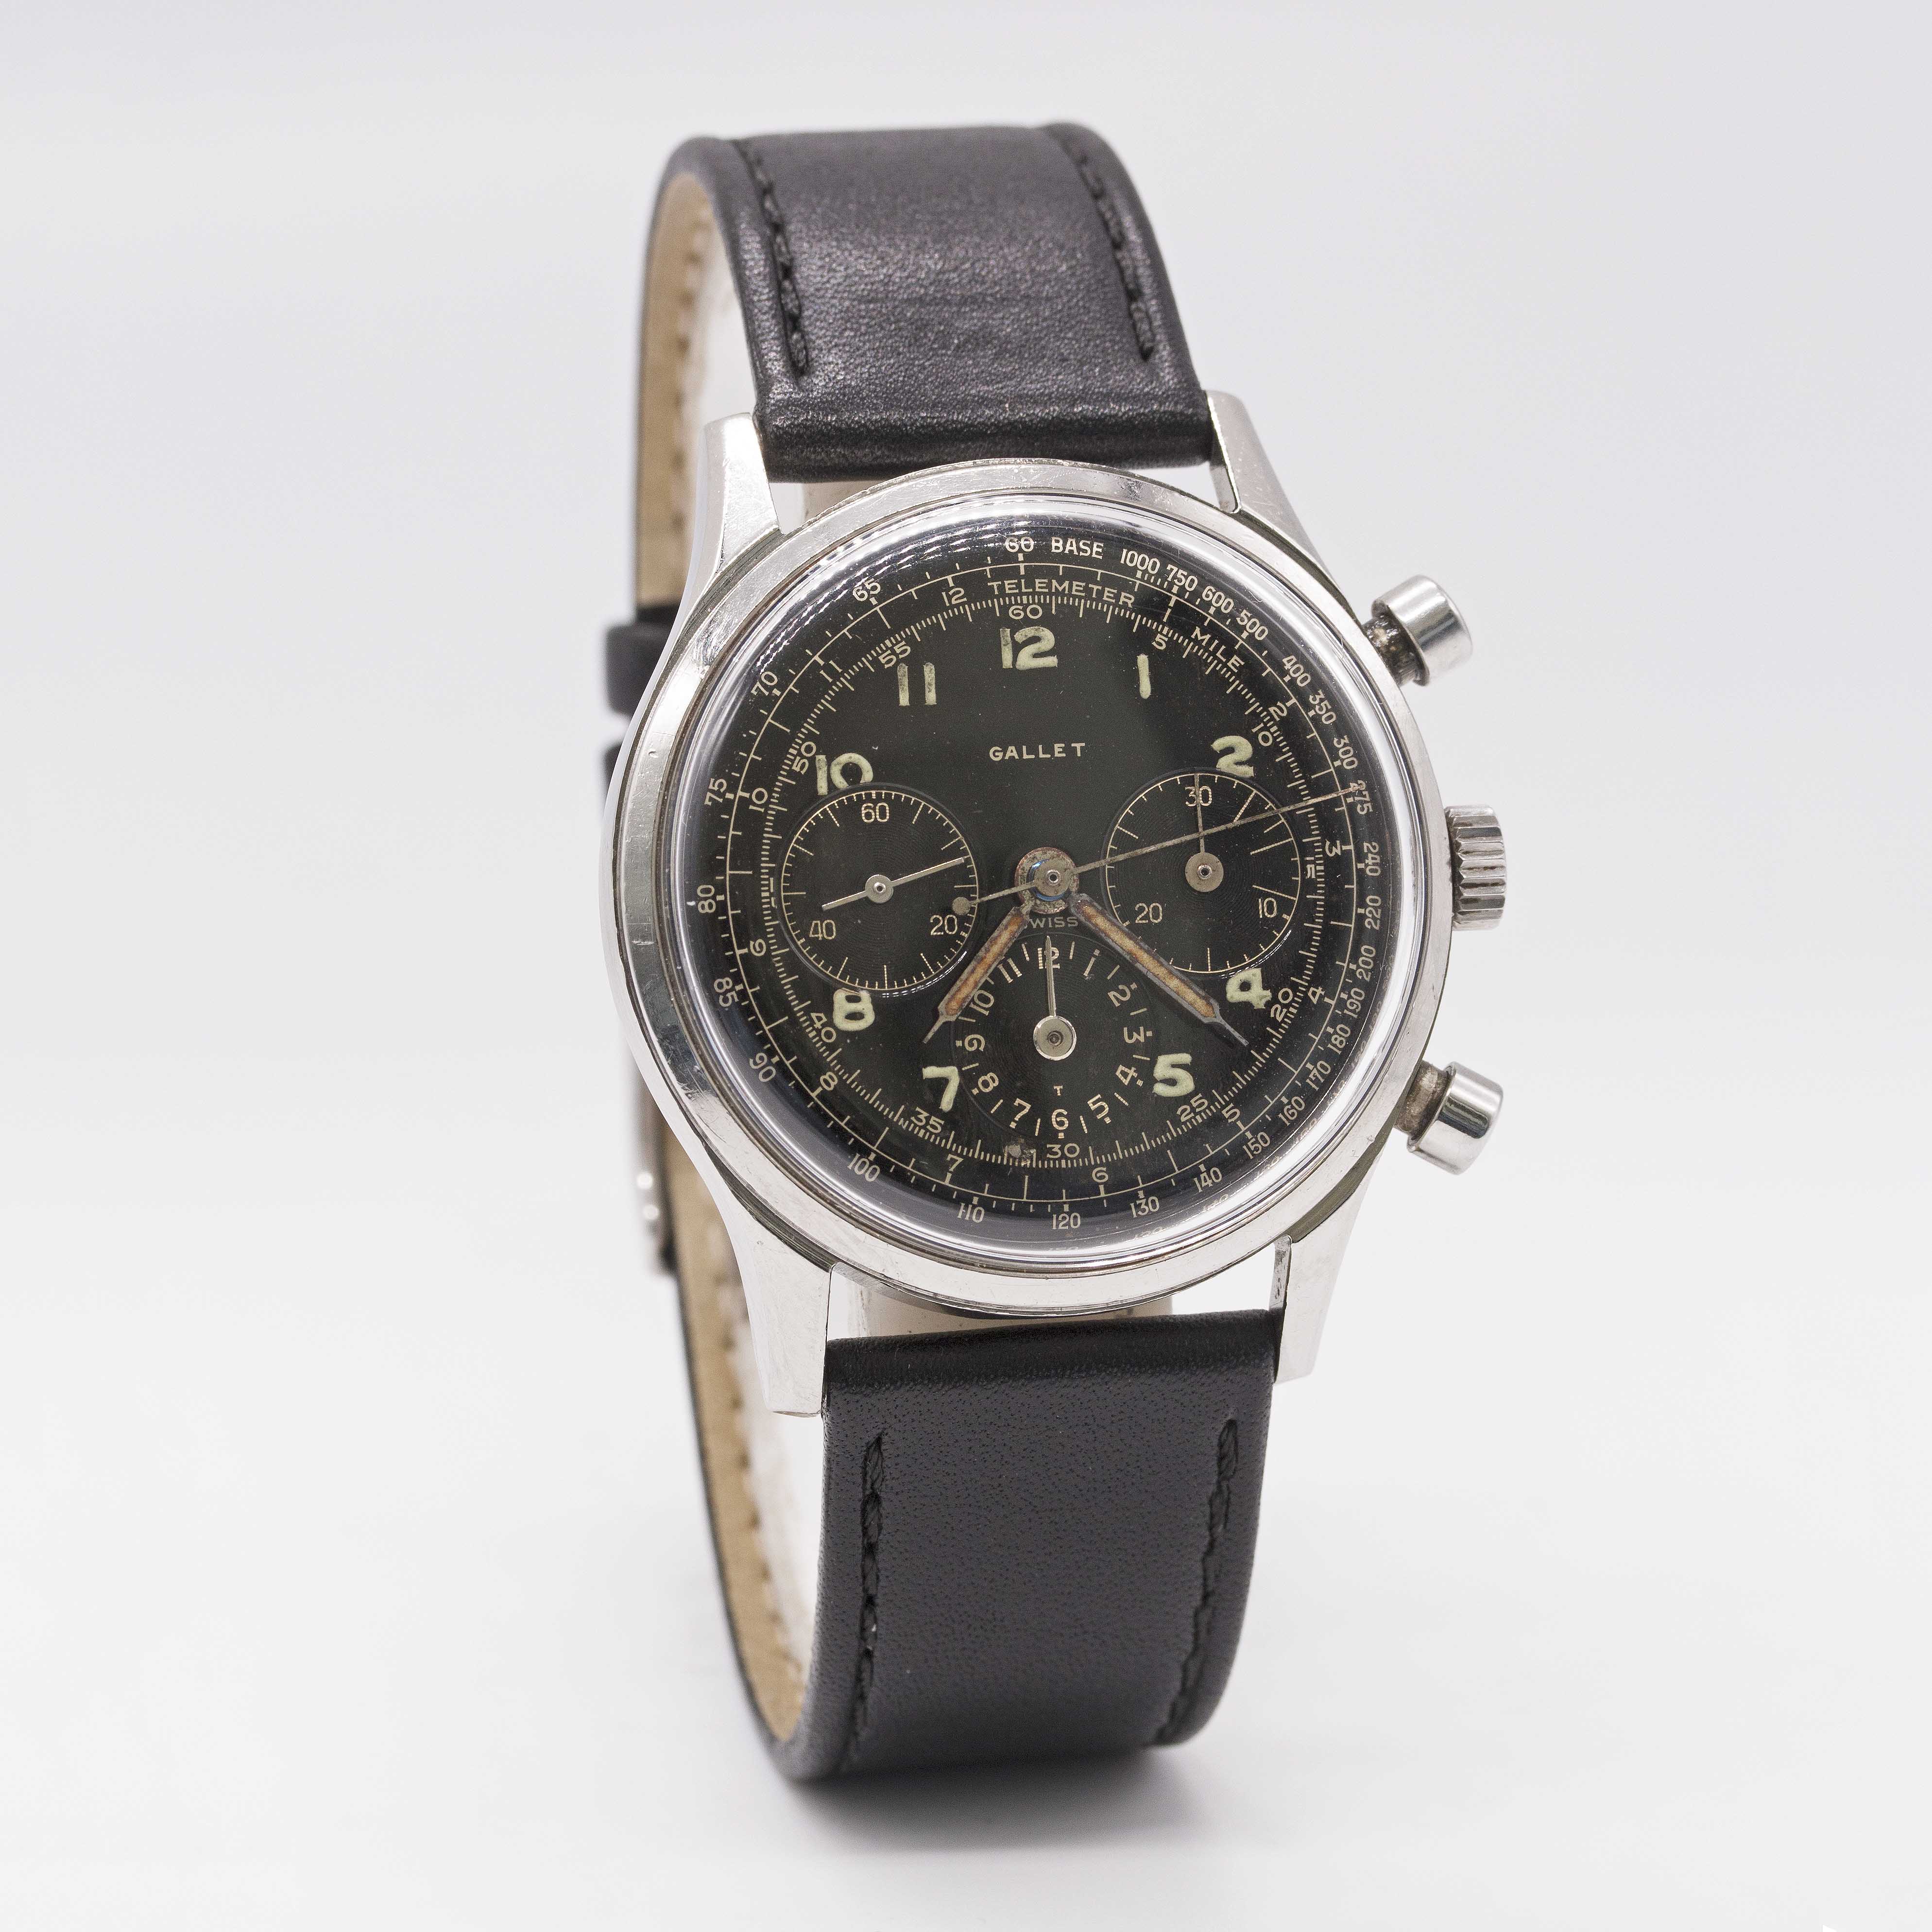 A GENTLEMAN'S LARGE SIZE STAINLESS STEEL GALLET MULTICHRON 12 "JIM CLARK" CHRONOGRAPH WRIST WATCH - Image 6 of 10